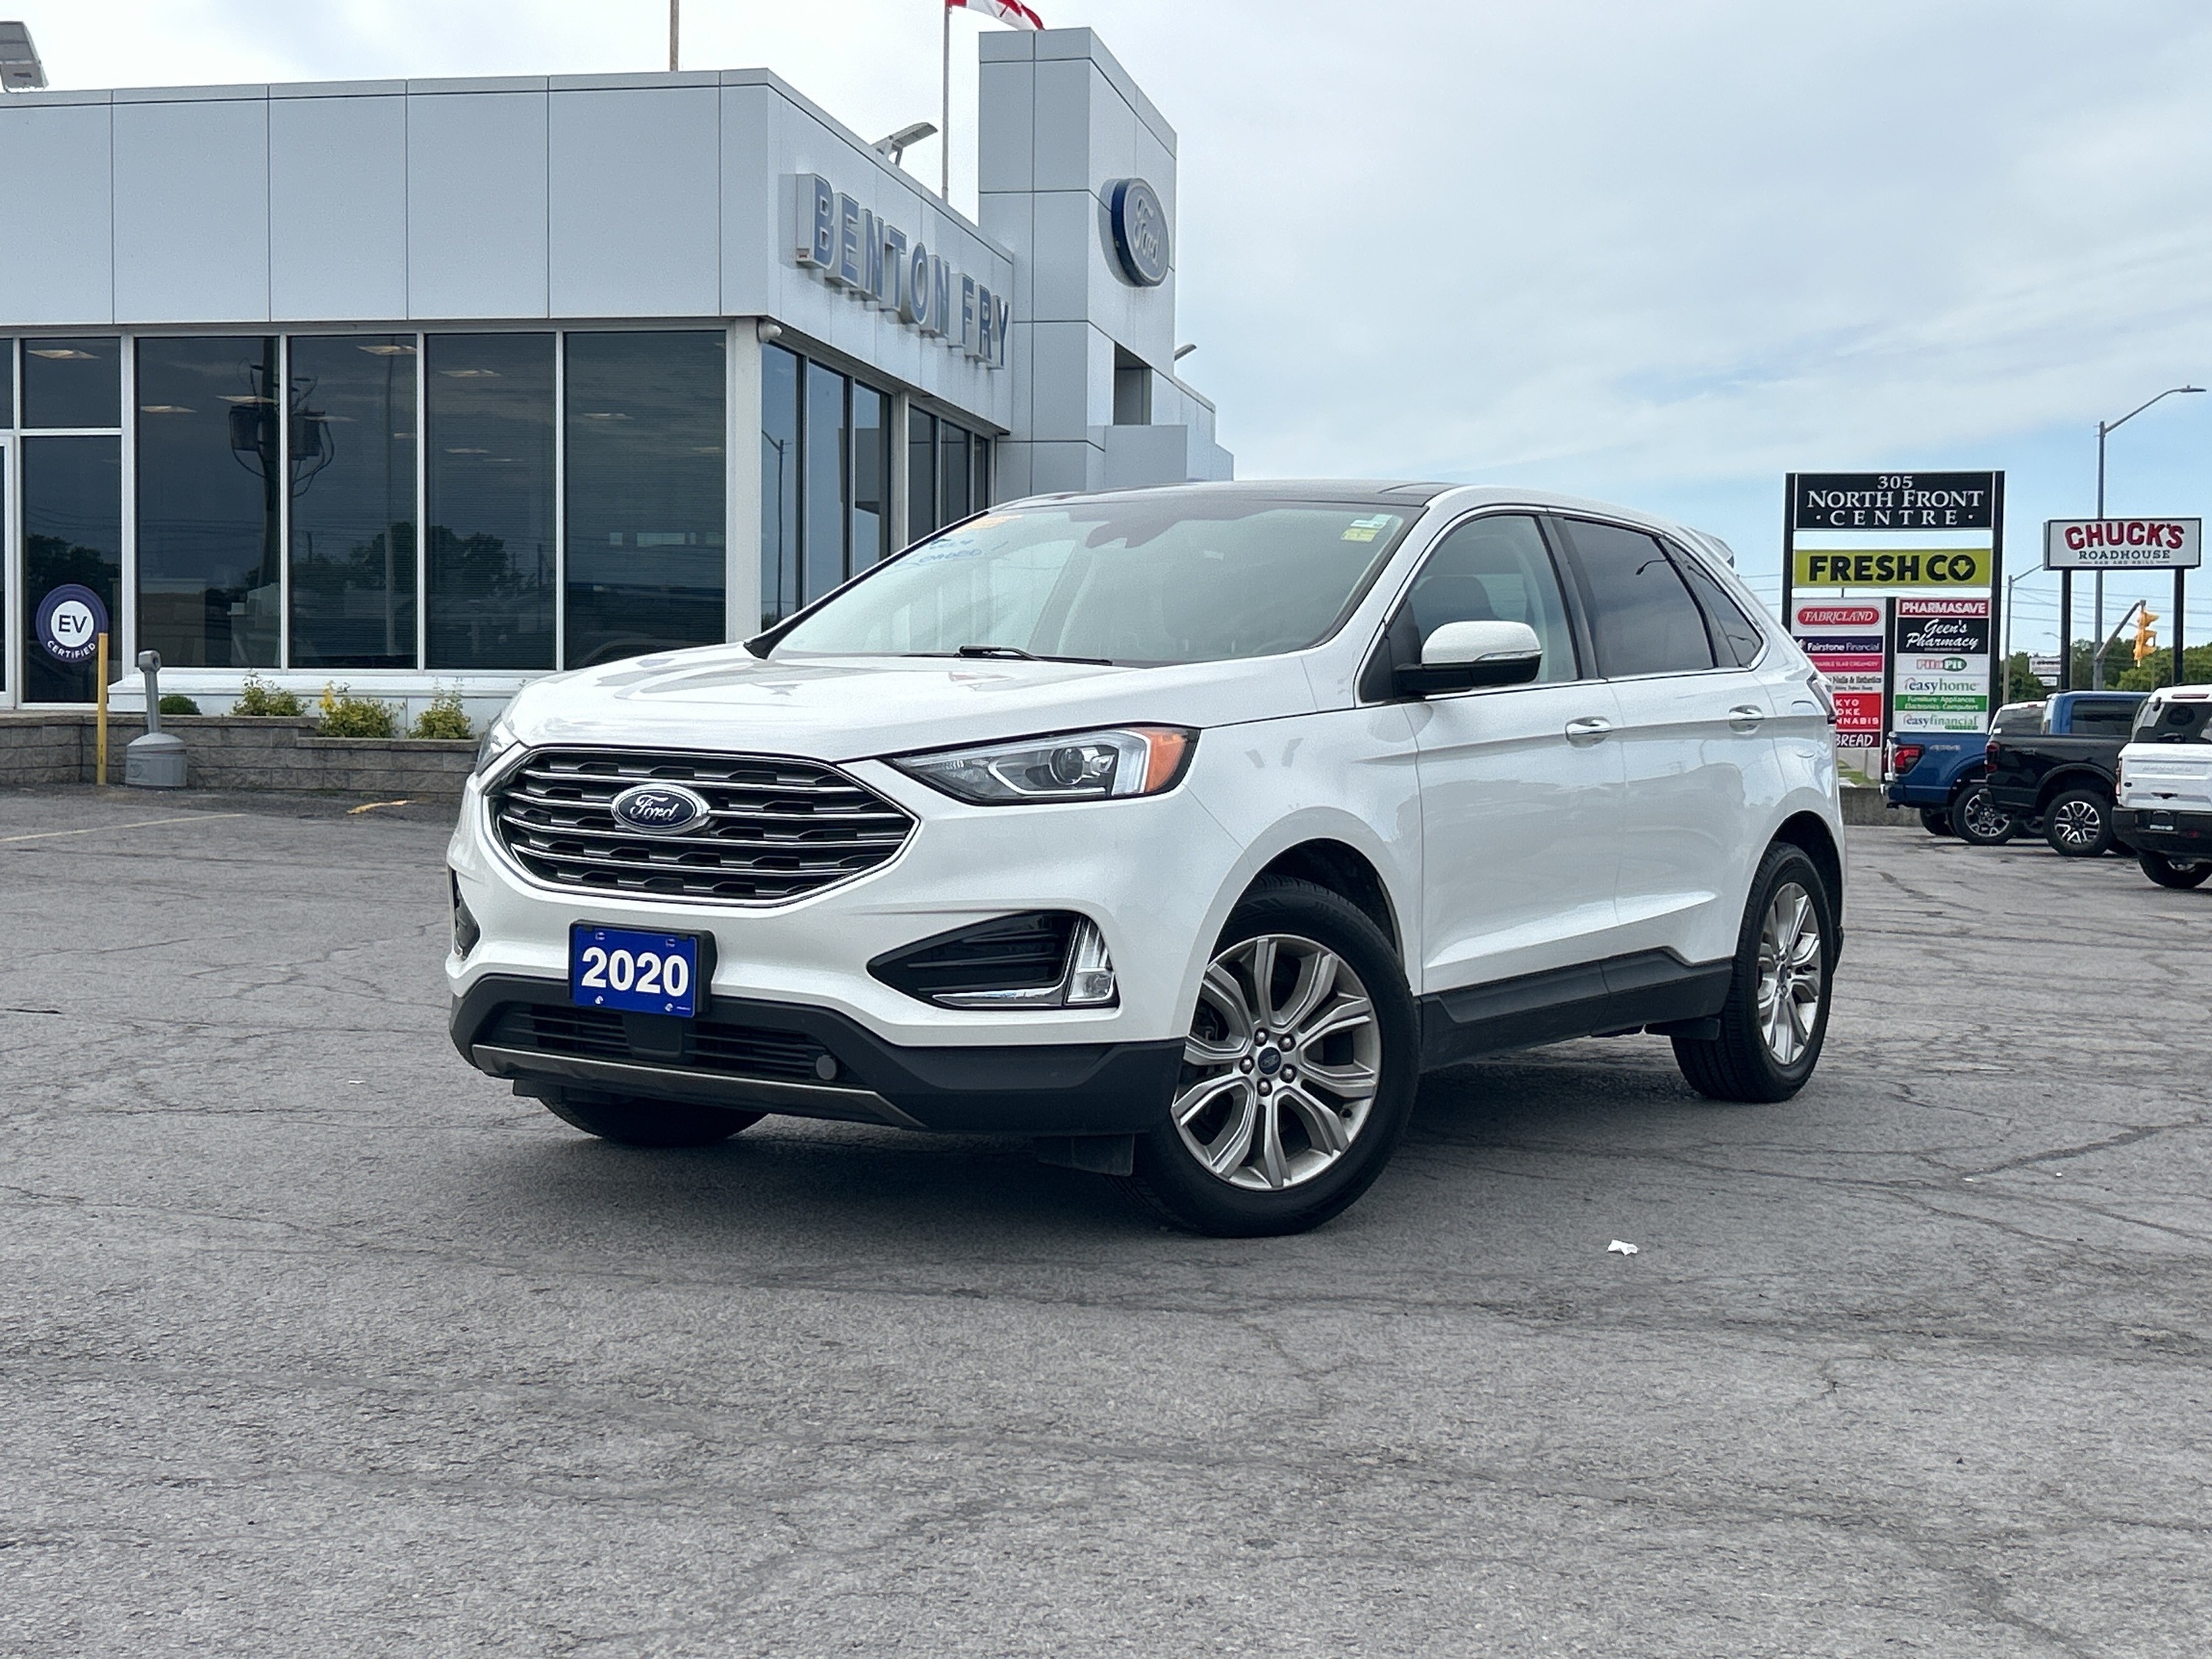 2020 Ford Edge Titanium - Price Drop! 2.0L Loaded with Leather, M